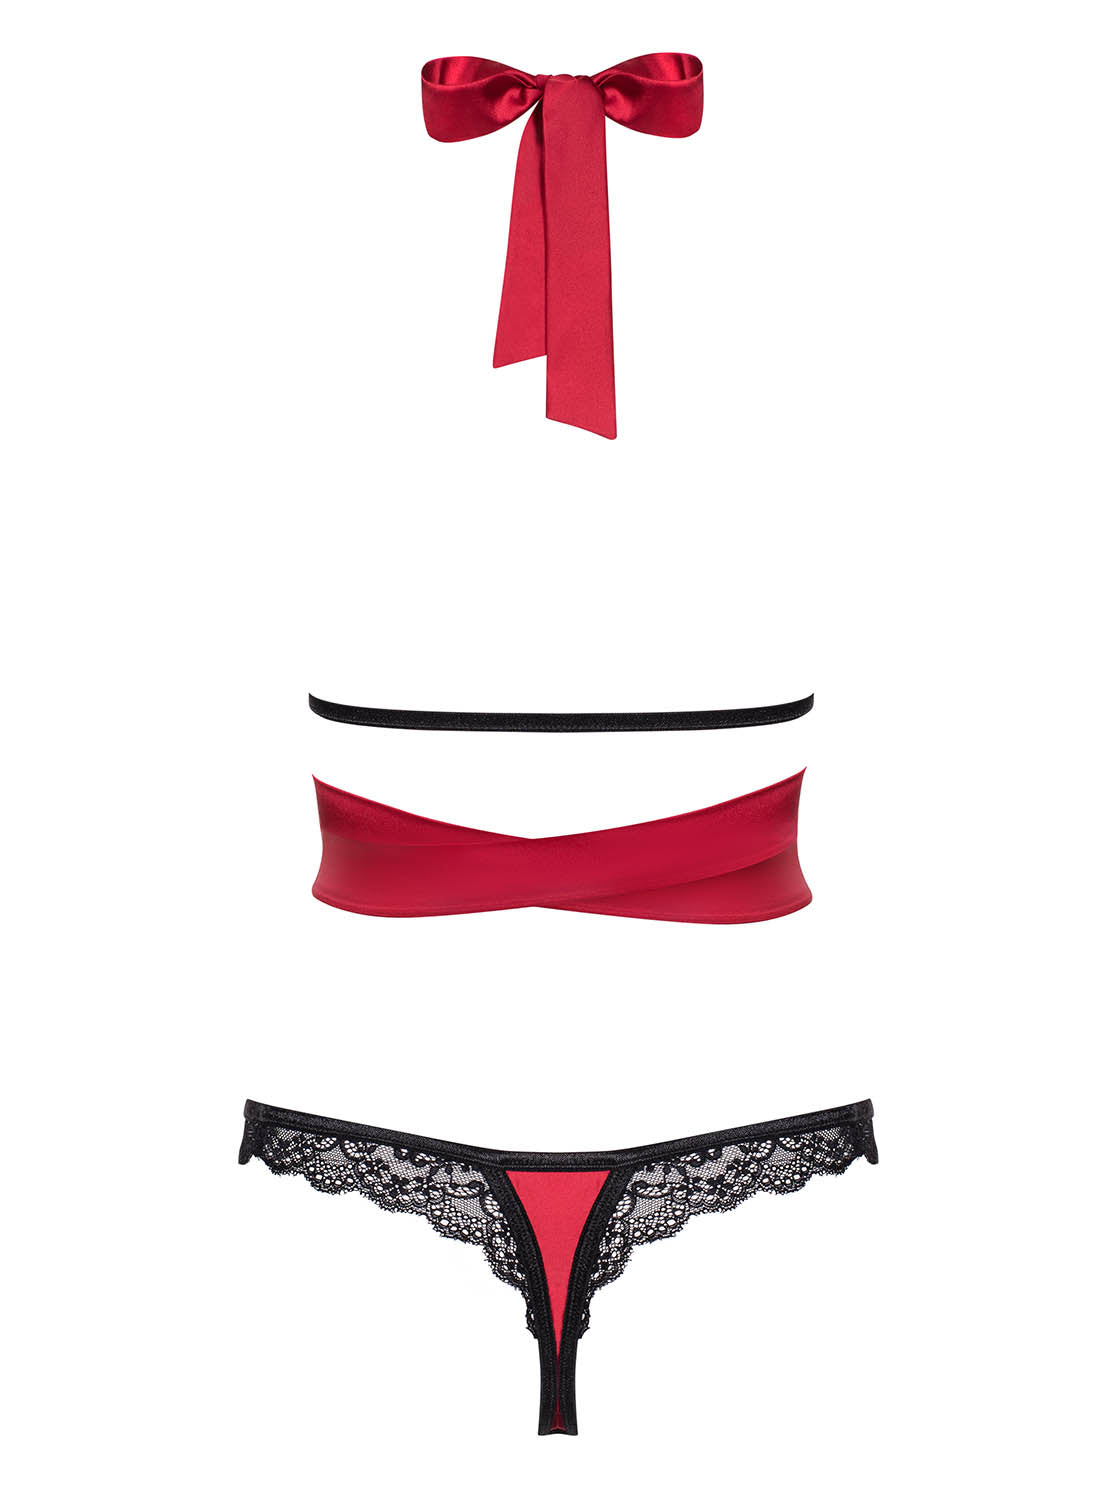 Sensuelia a beautiful set made of silky soft material in red with elegant black lace